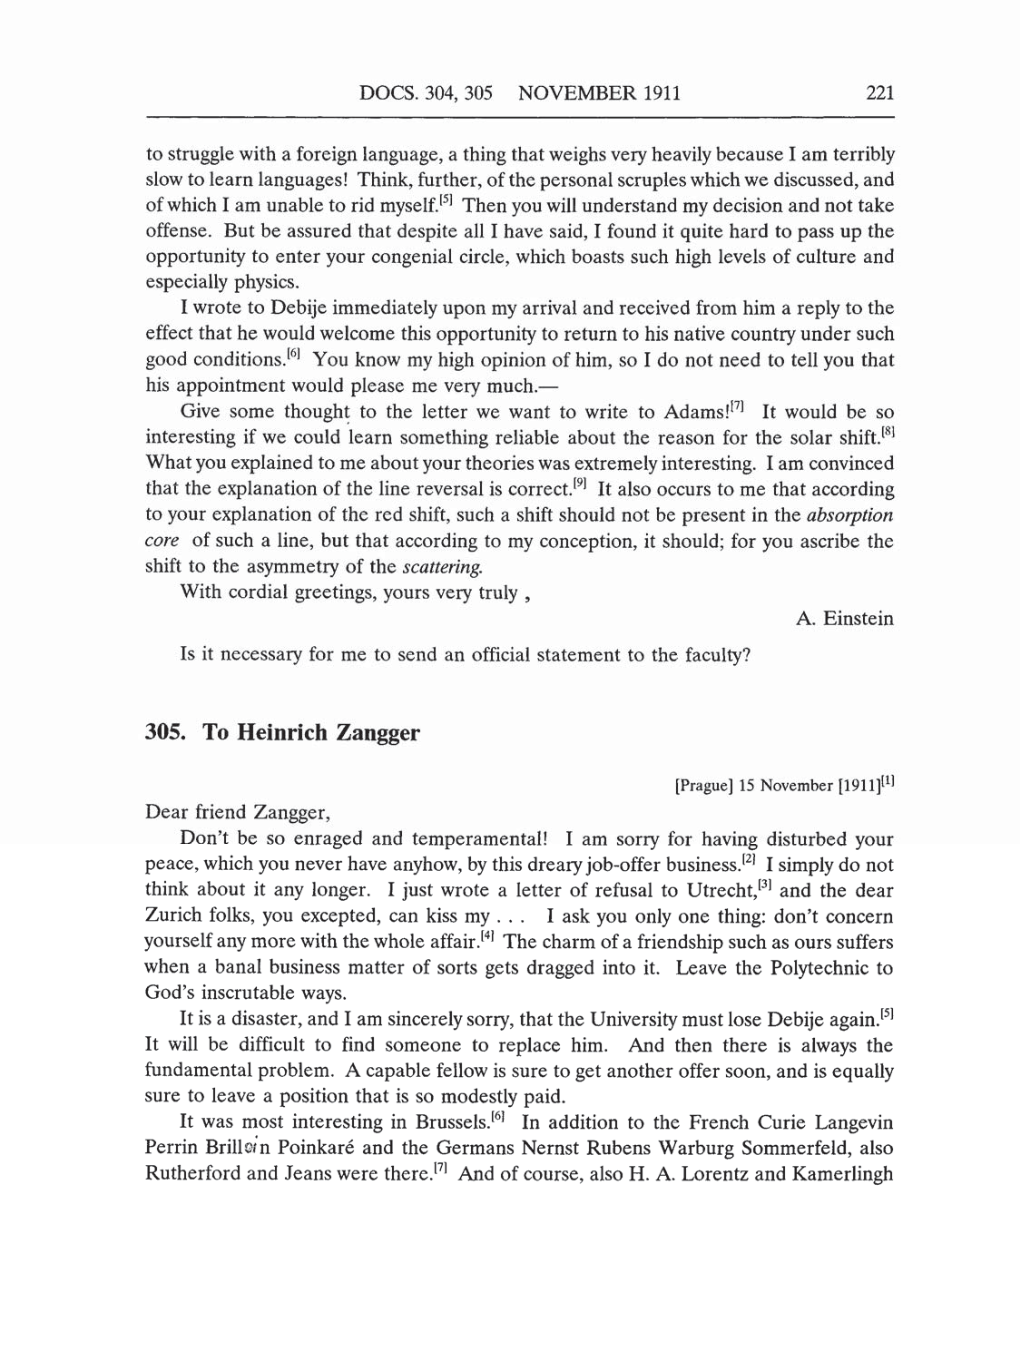 Volume 5: The Swiss Years: Correspondence, 1902-1914 (English translation supplement) page 221